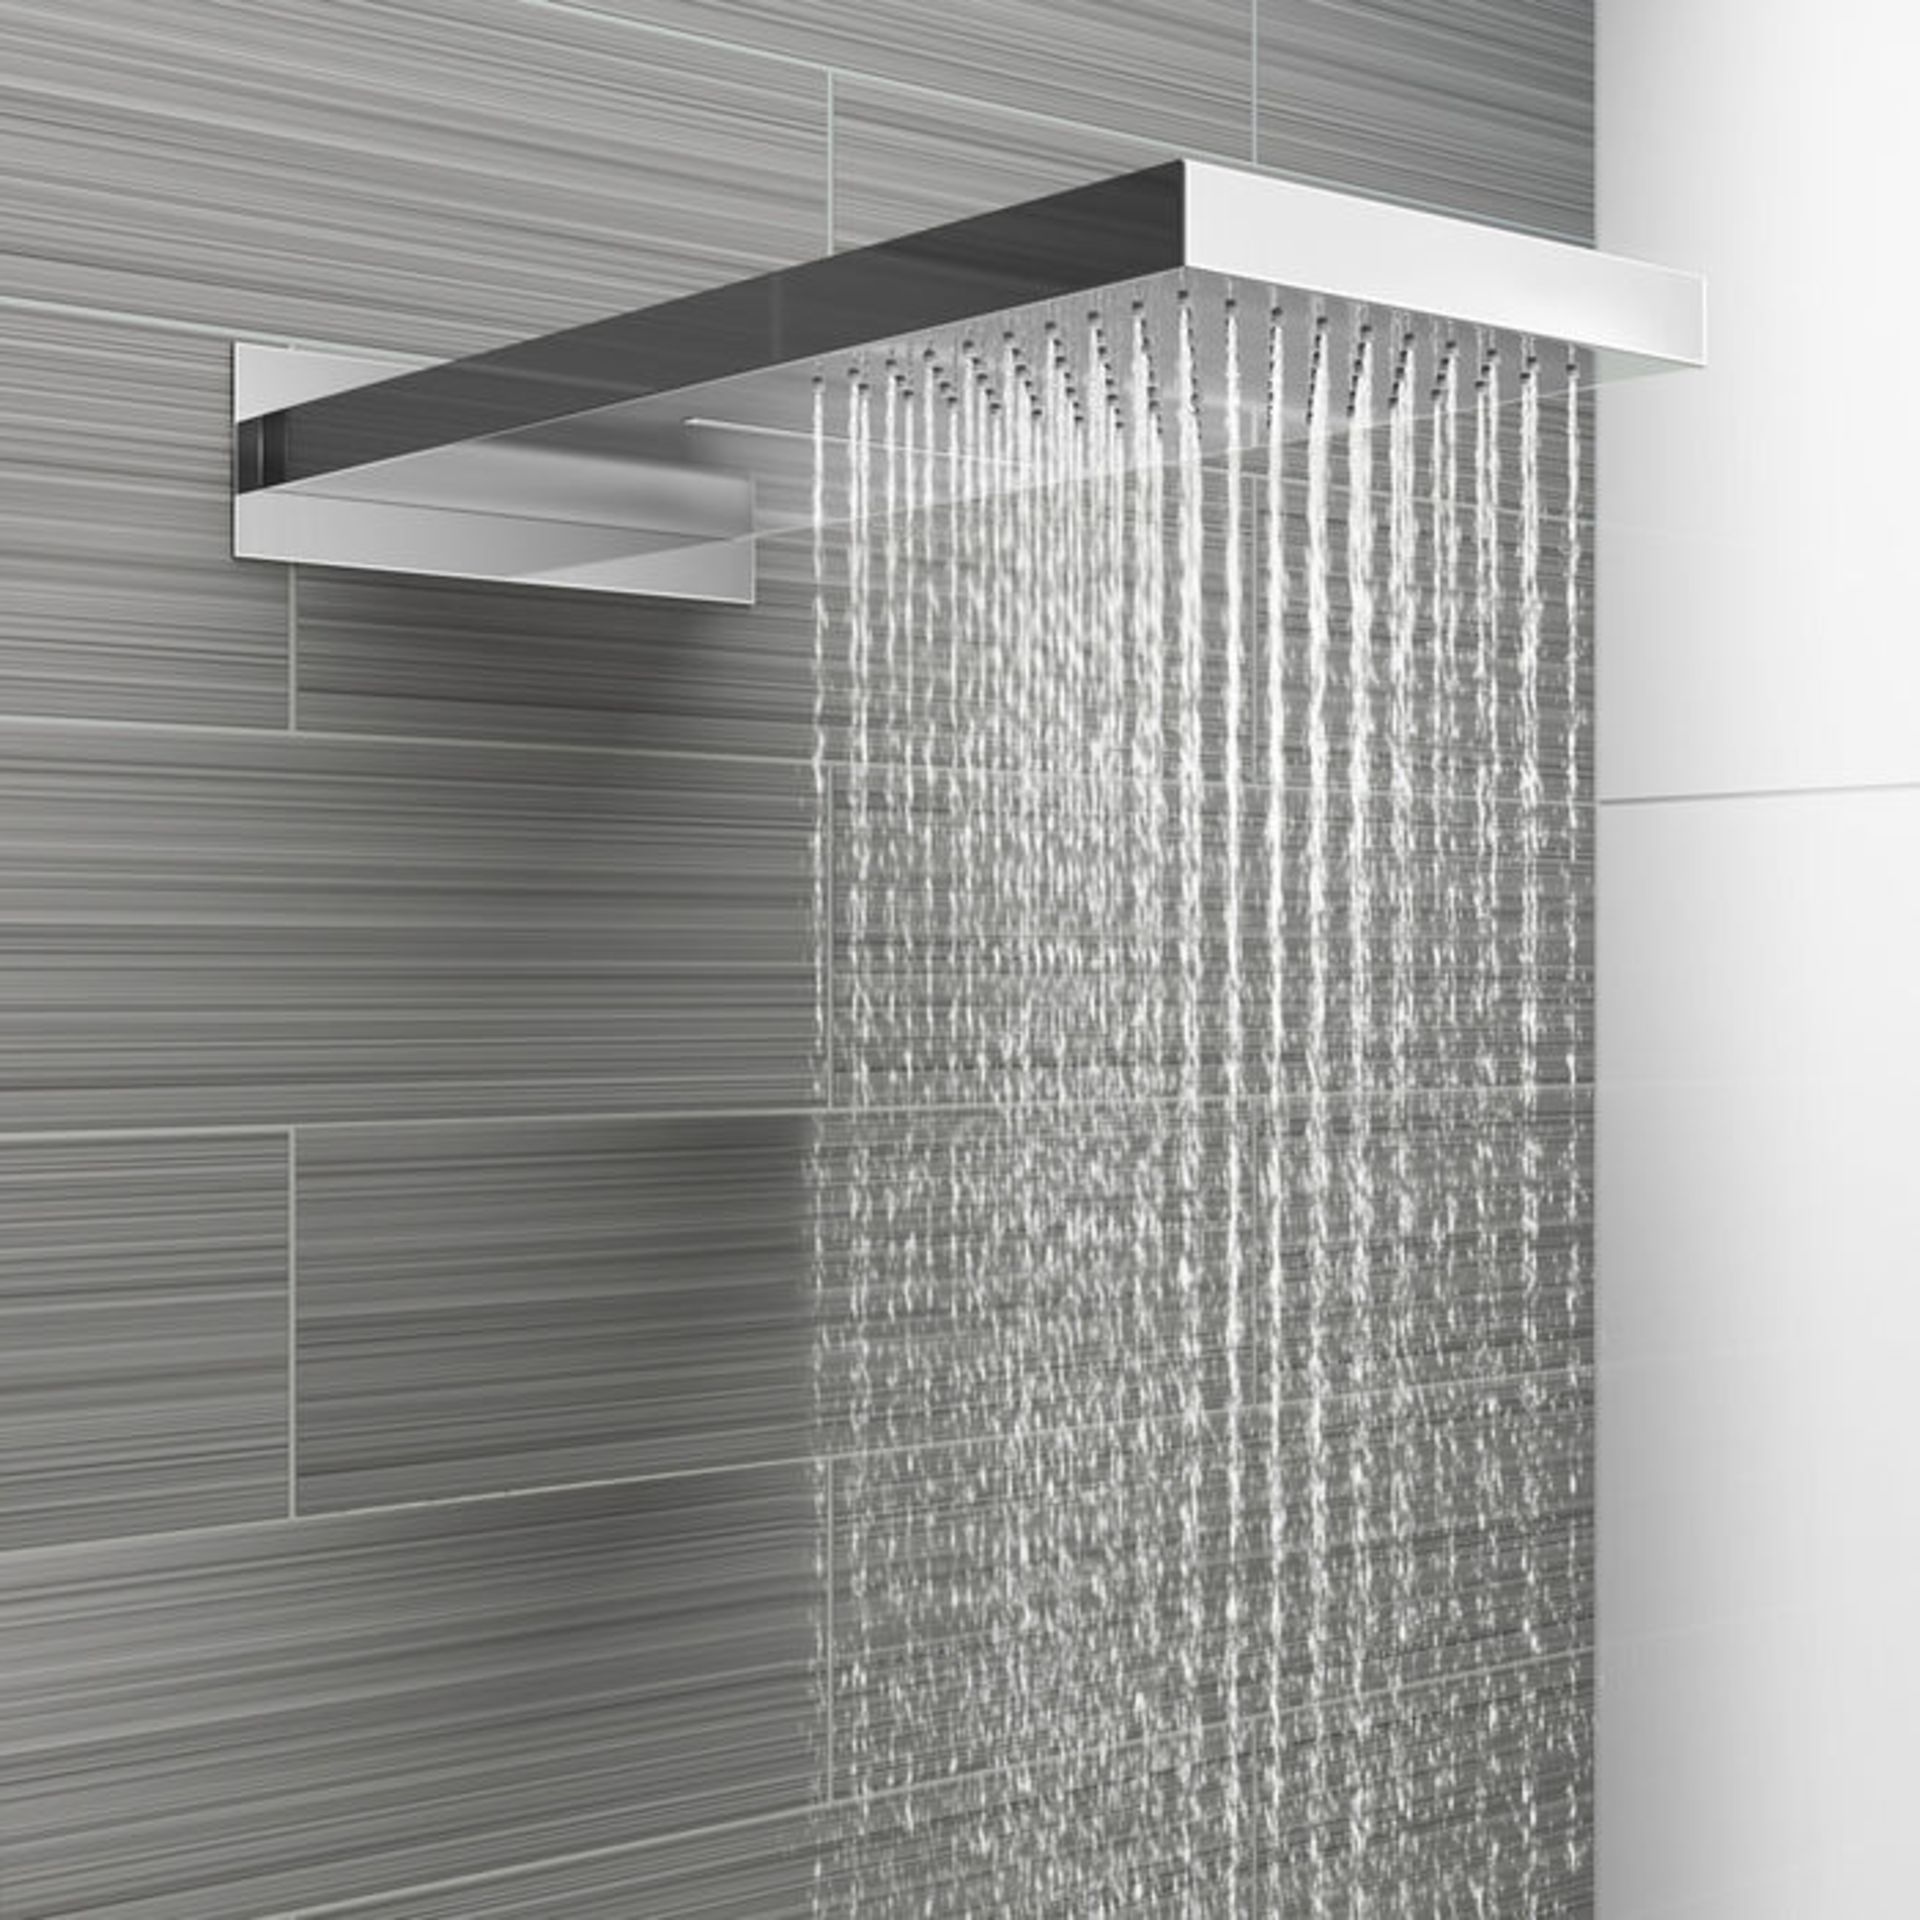 (AA9) Stainless Steel 230x500mm Waterfall Shower Head. RRP £374.99. Dual function waterfall an... - Image 3 of 4